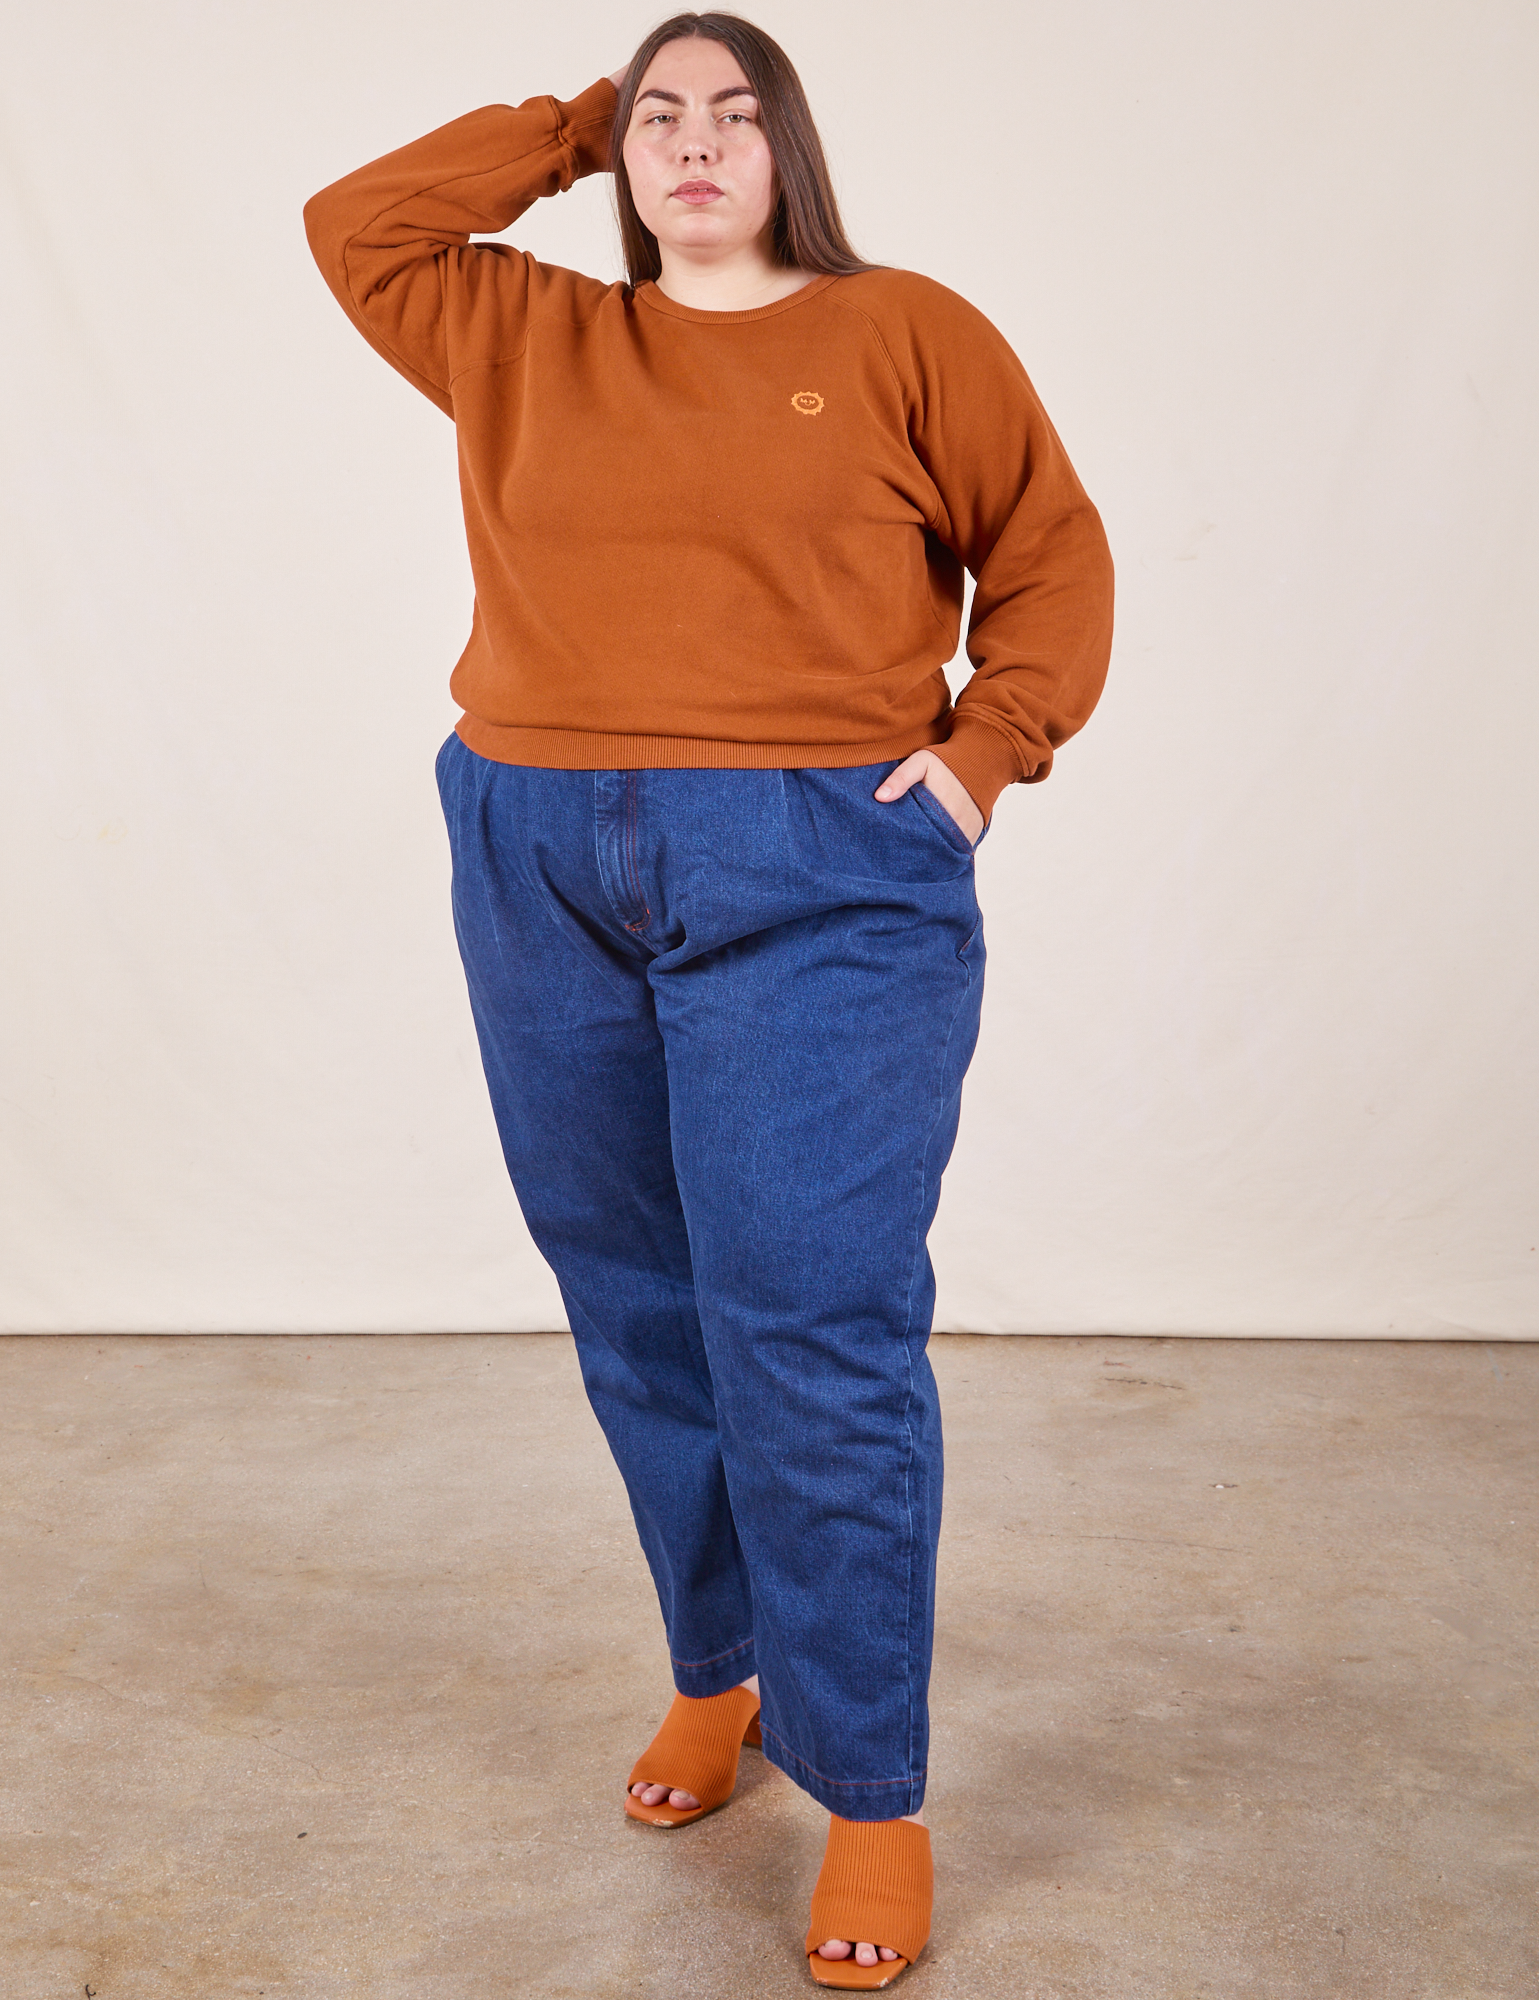 Marielena is wearing L Heavyweight Crew in Burnt Terracotta paired with dark wash Denim Trouser Jeans